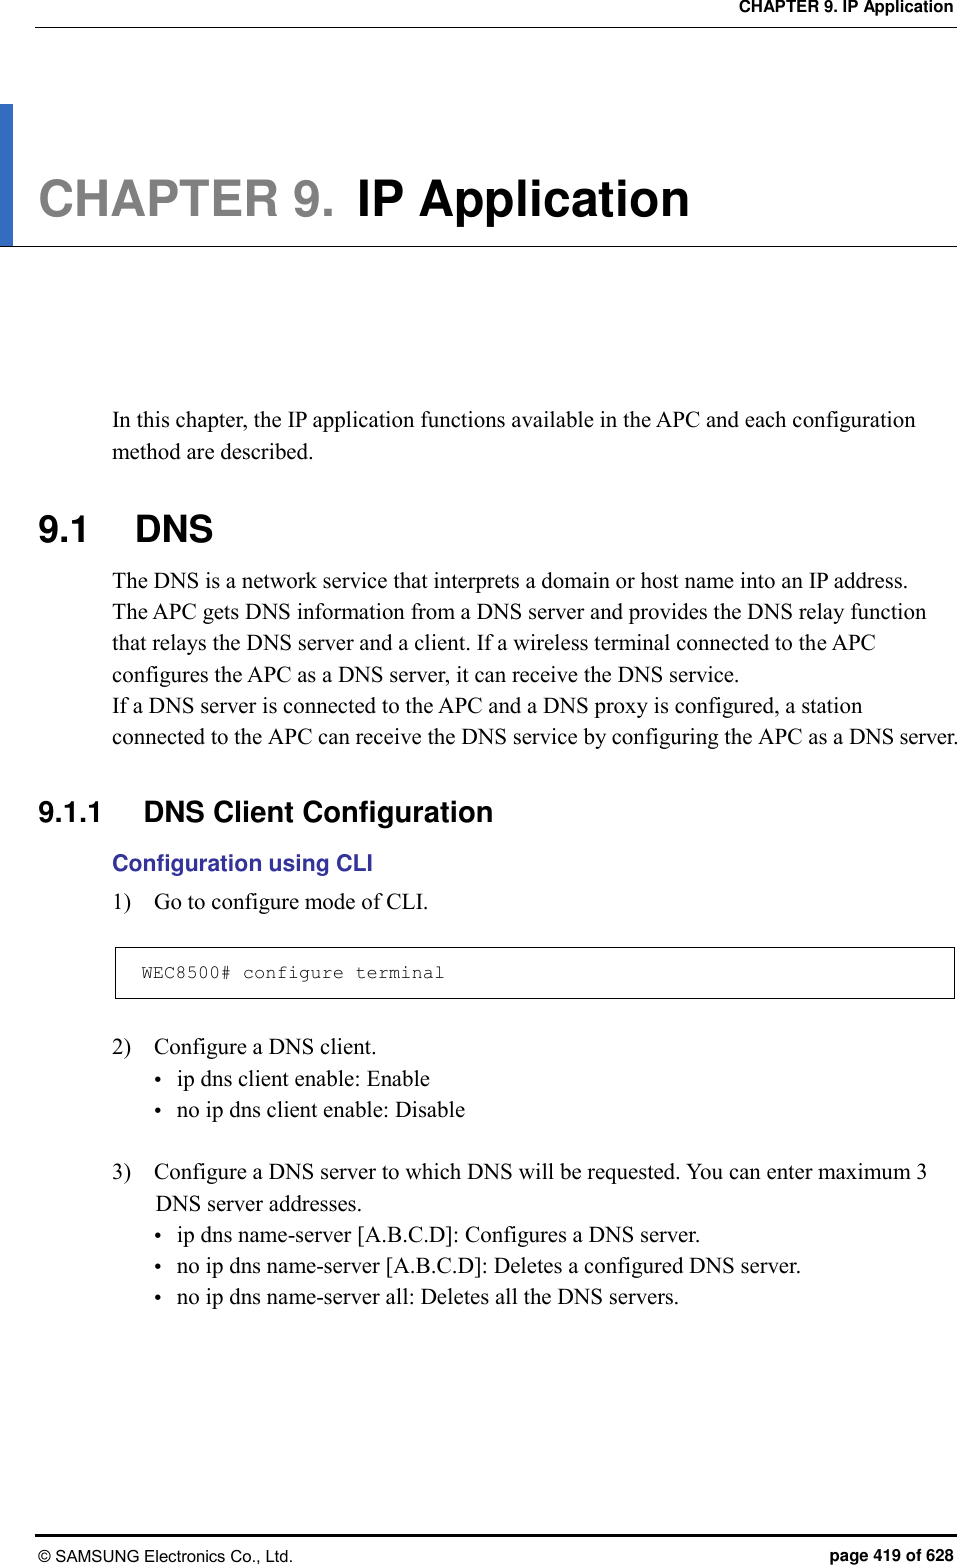 CHAPTER 9. IP Application © SAMSUNG Electronics Co., Ltd.  page 419 of 628 CHAPTER 9. IP Application      In this chapter, the IP application functions available in the APC and each configuration method are described.  9.1  DNS The DNS is a network service that interprets a domain or host name into an IP address.   The APC gets DNS information from a DNS server and provides the DNS relay function that relays the DNS server and a client. If a wireless terminal connected to the APC configures the APC as a DNS server, it can receive the DNS service.   If a DNS server is connected to the APC and a DNS proxy is configured, a station connected to the APC can receive the DNS service by configuring the APC as a DNS server.  9.1.1  DNS Client Configuration Configuration using CLI 1)    Go to configure mode of CLI.  WEC8500# configure terminal  2)    Configure a DNS client.  ip dns client enable: Enable    no ip dns client enable: Disable  3)    Configure a DNS server to which DNS will be requested. You can enter maximum 3 DNS server addresses.    ip dns name-server [A.B.C.D]: Configures a DNS server.  no ip dns name-server [A.B.C.D]: Deletes a configured DNS server.  no ip dns name-server all: Deletes all the DNS servers.  